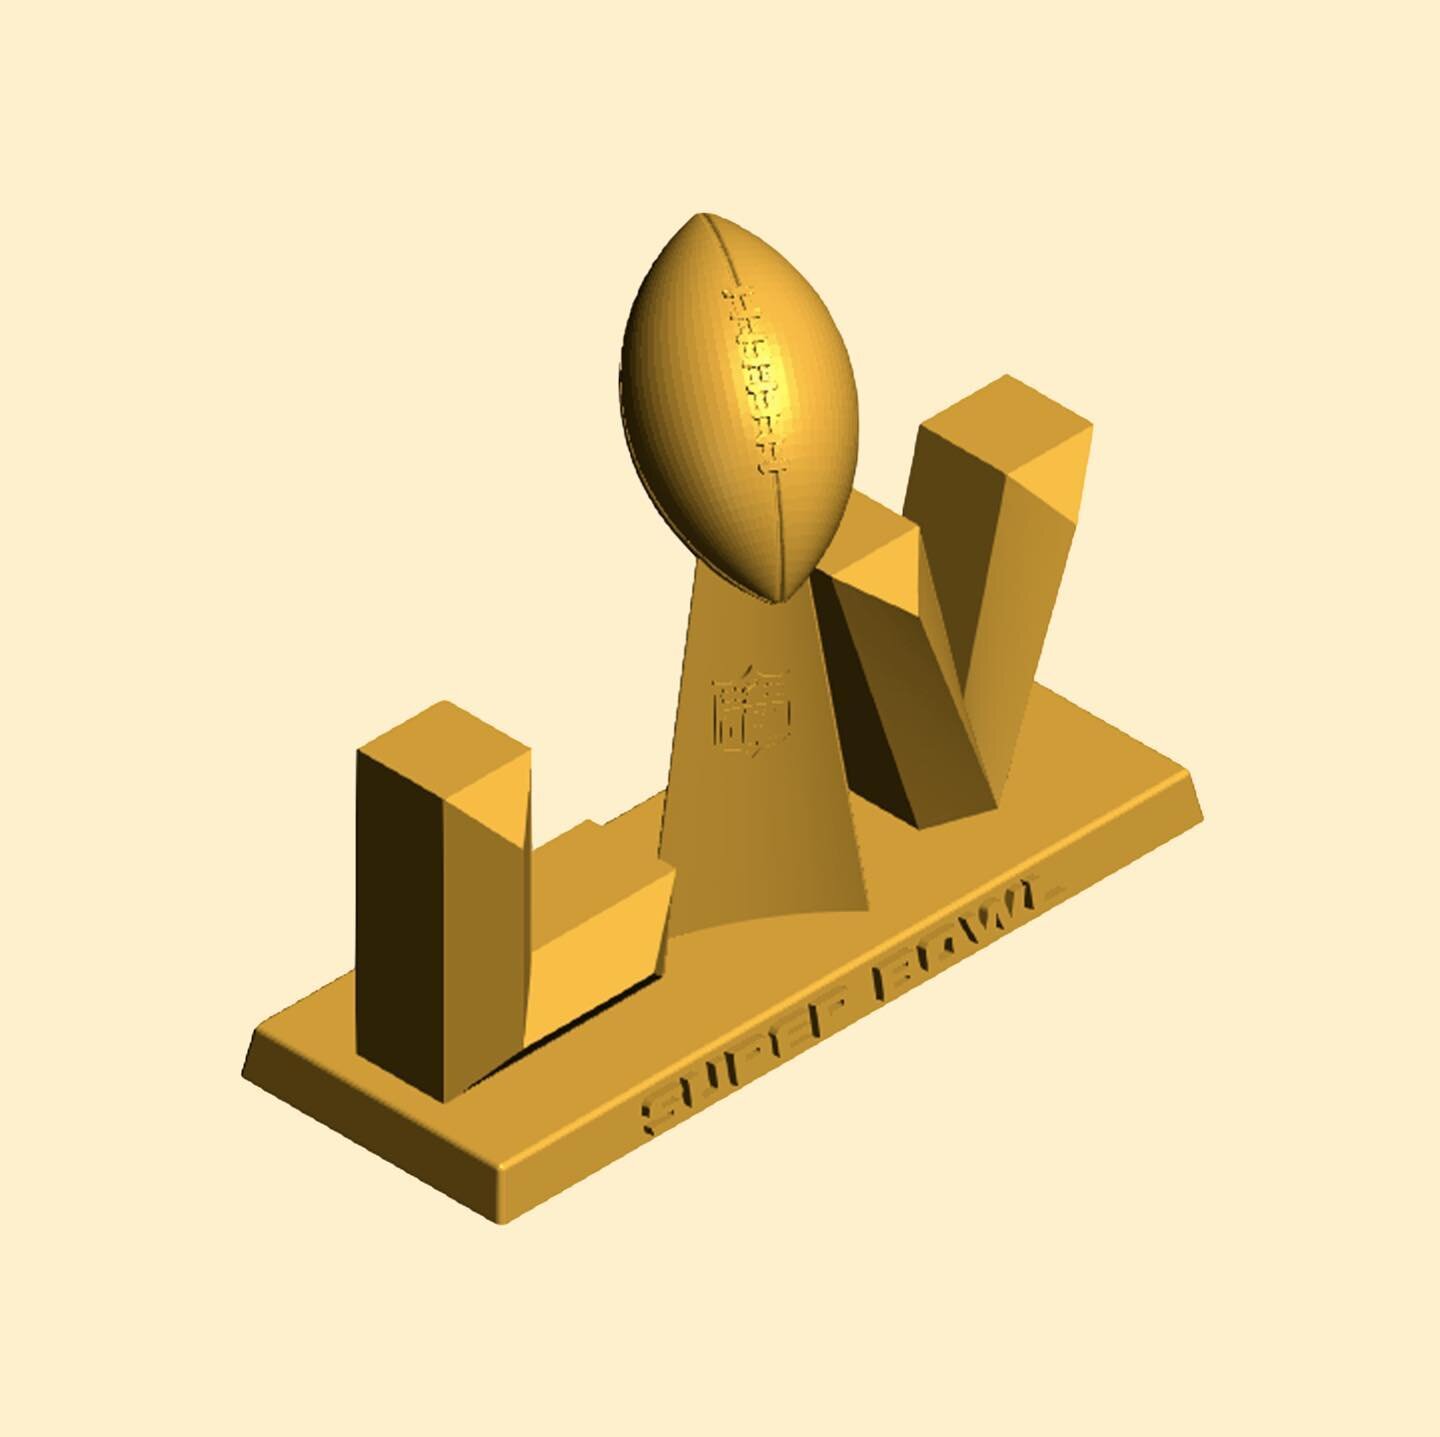 Did you enjoy last nights Super Bowl? We sure did! Let&rsquo;s remember the memory with a 3D print. You can find this print on Thingiverse! Come to the lab to print one out for yourself or as a gift.